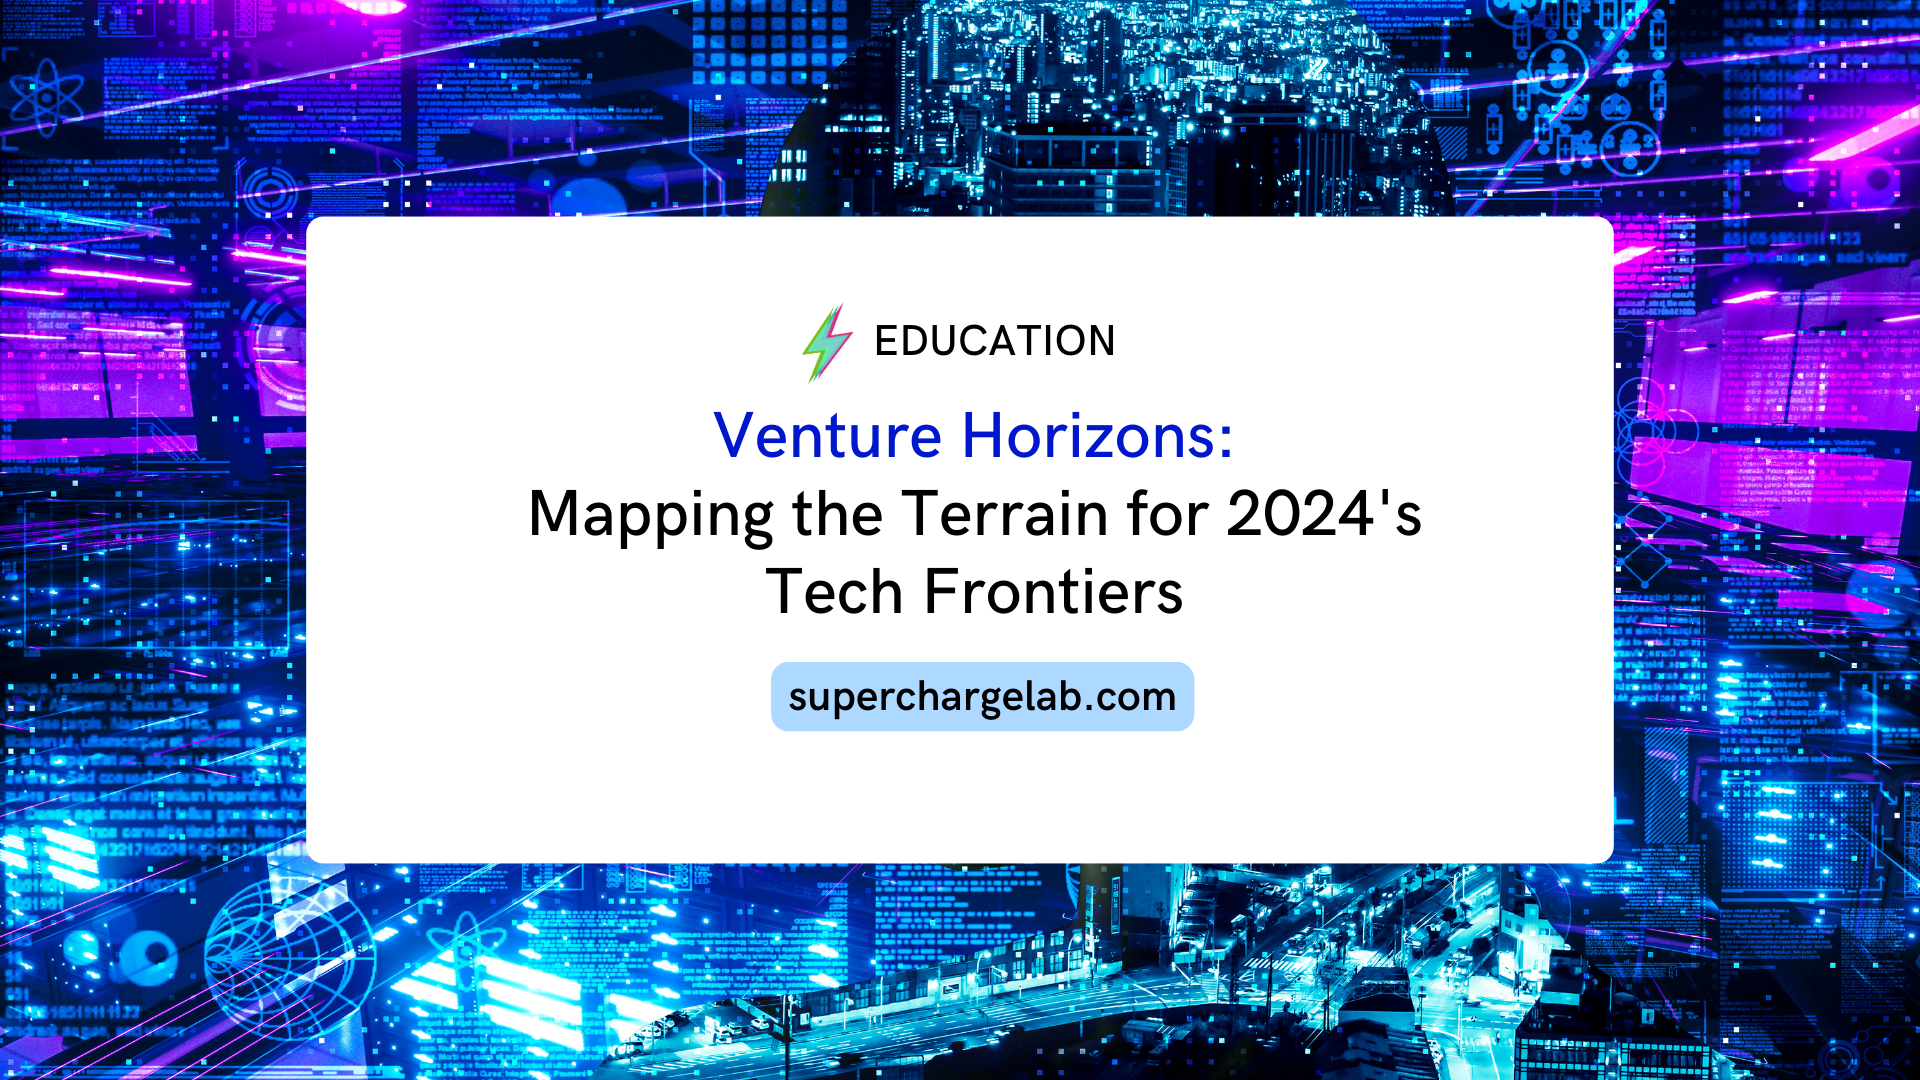 Venture Horizons: Mapping the Terrain for 2024's Tech Frontiers